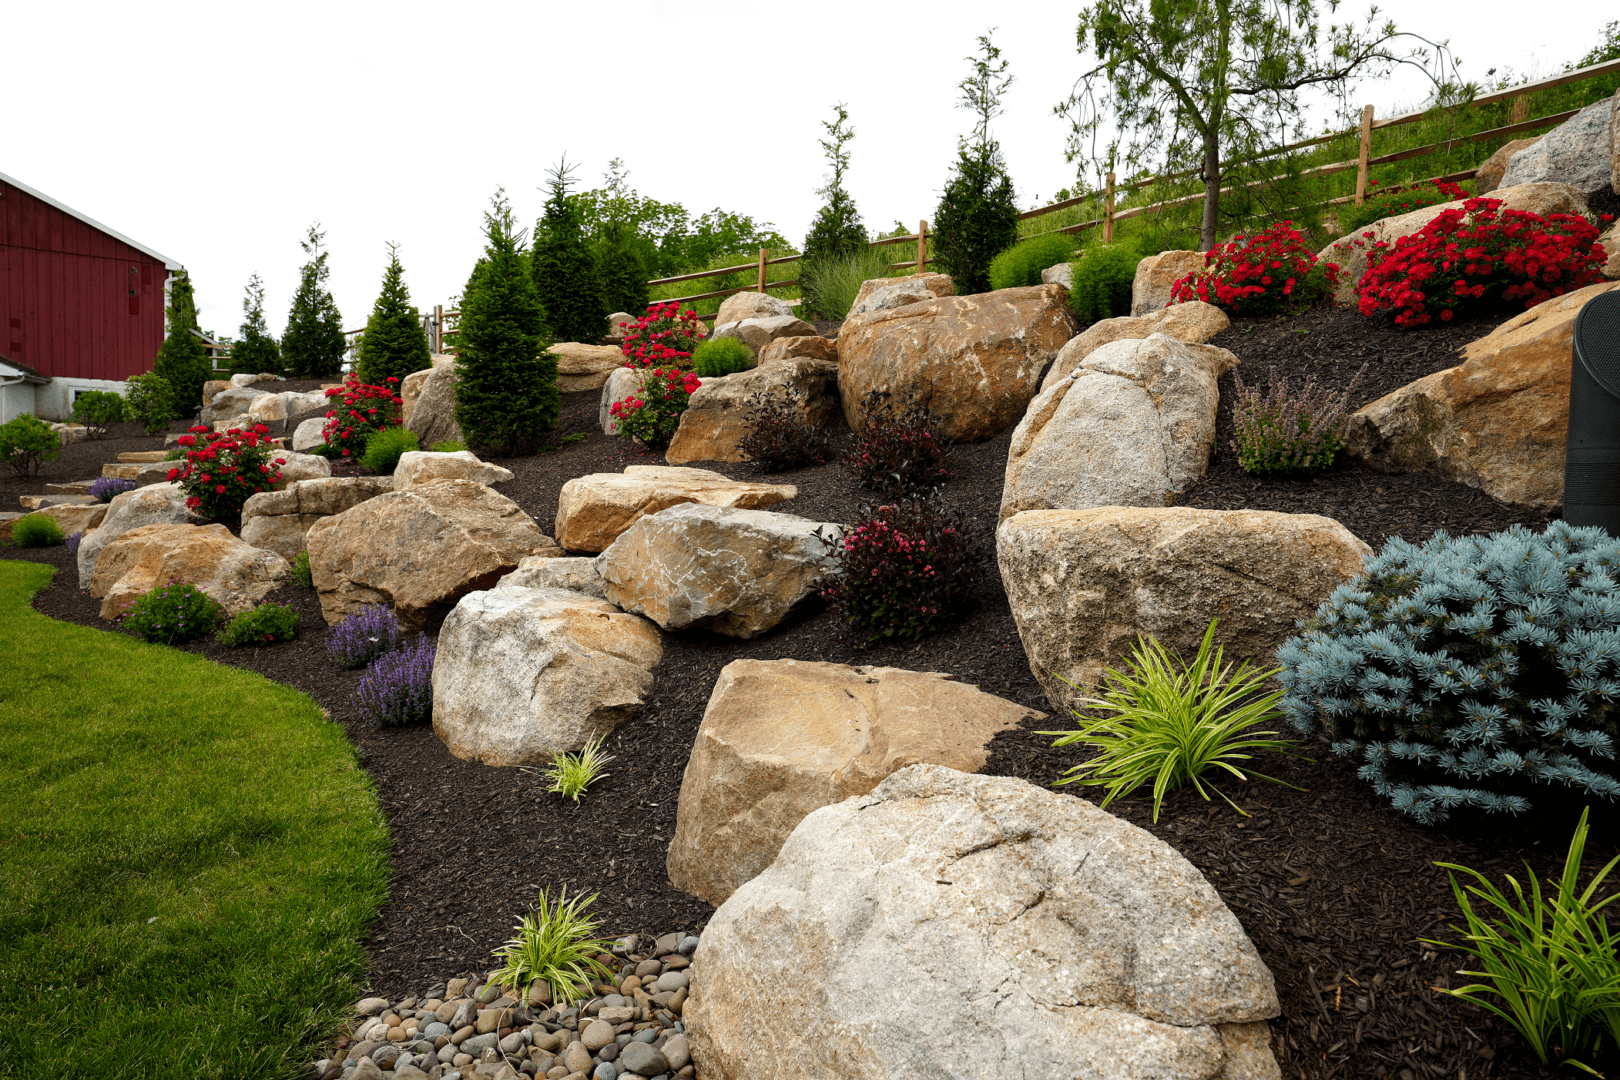 A professionally designed rock garden with vibrant flowers and lush shrubs, expertly created by Planting Professionals.